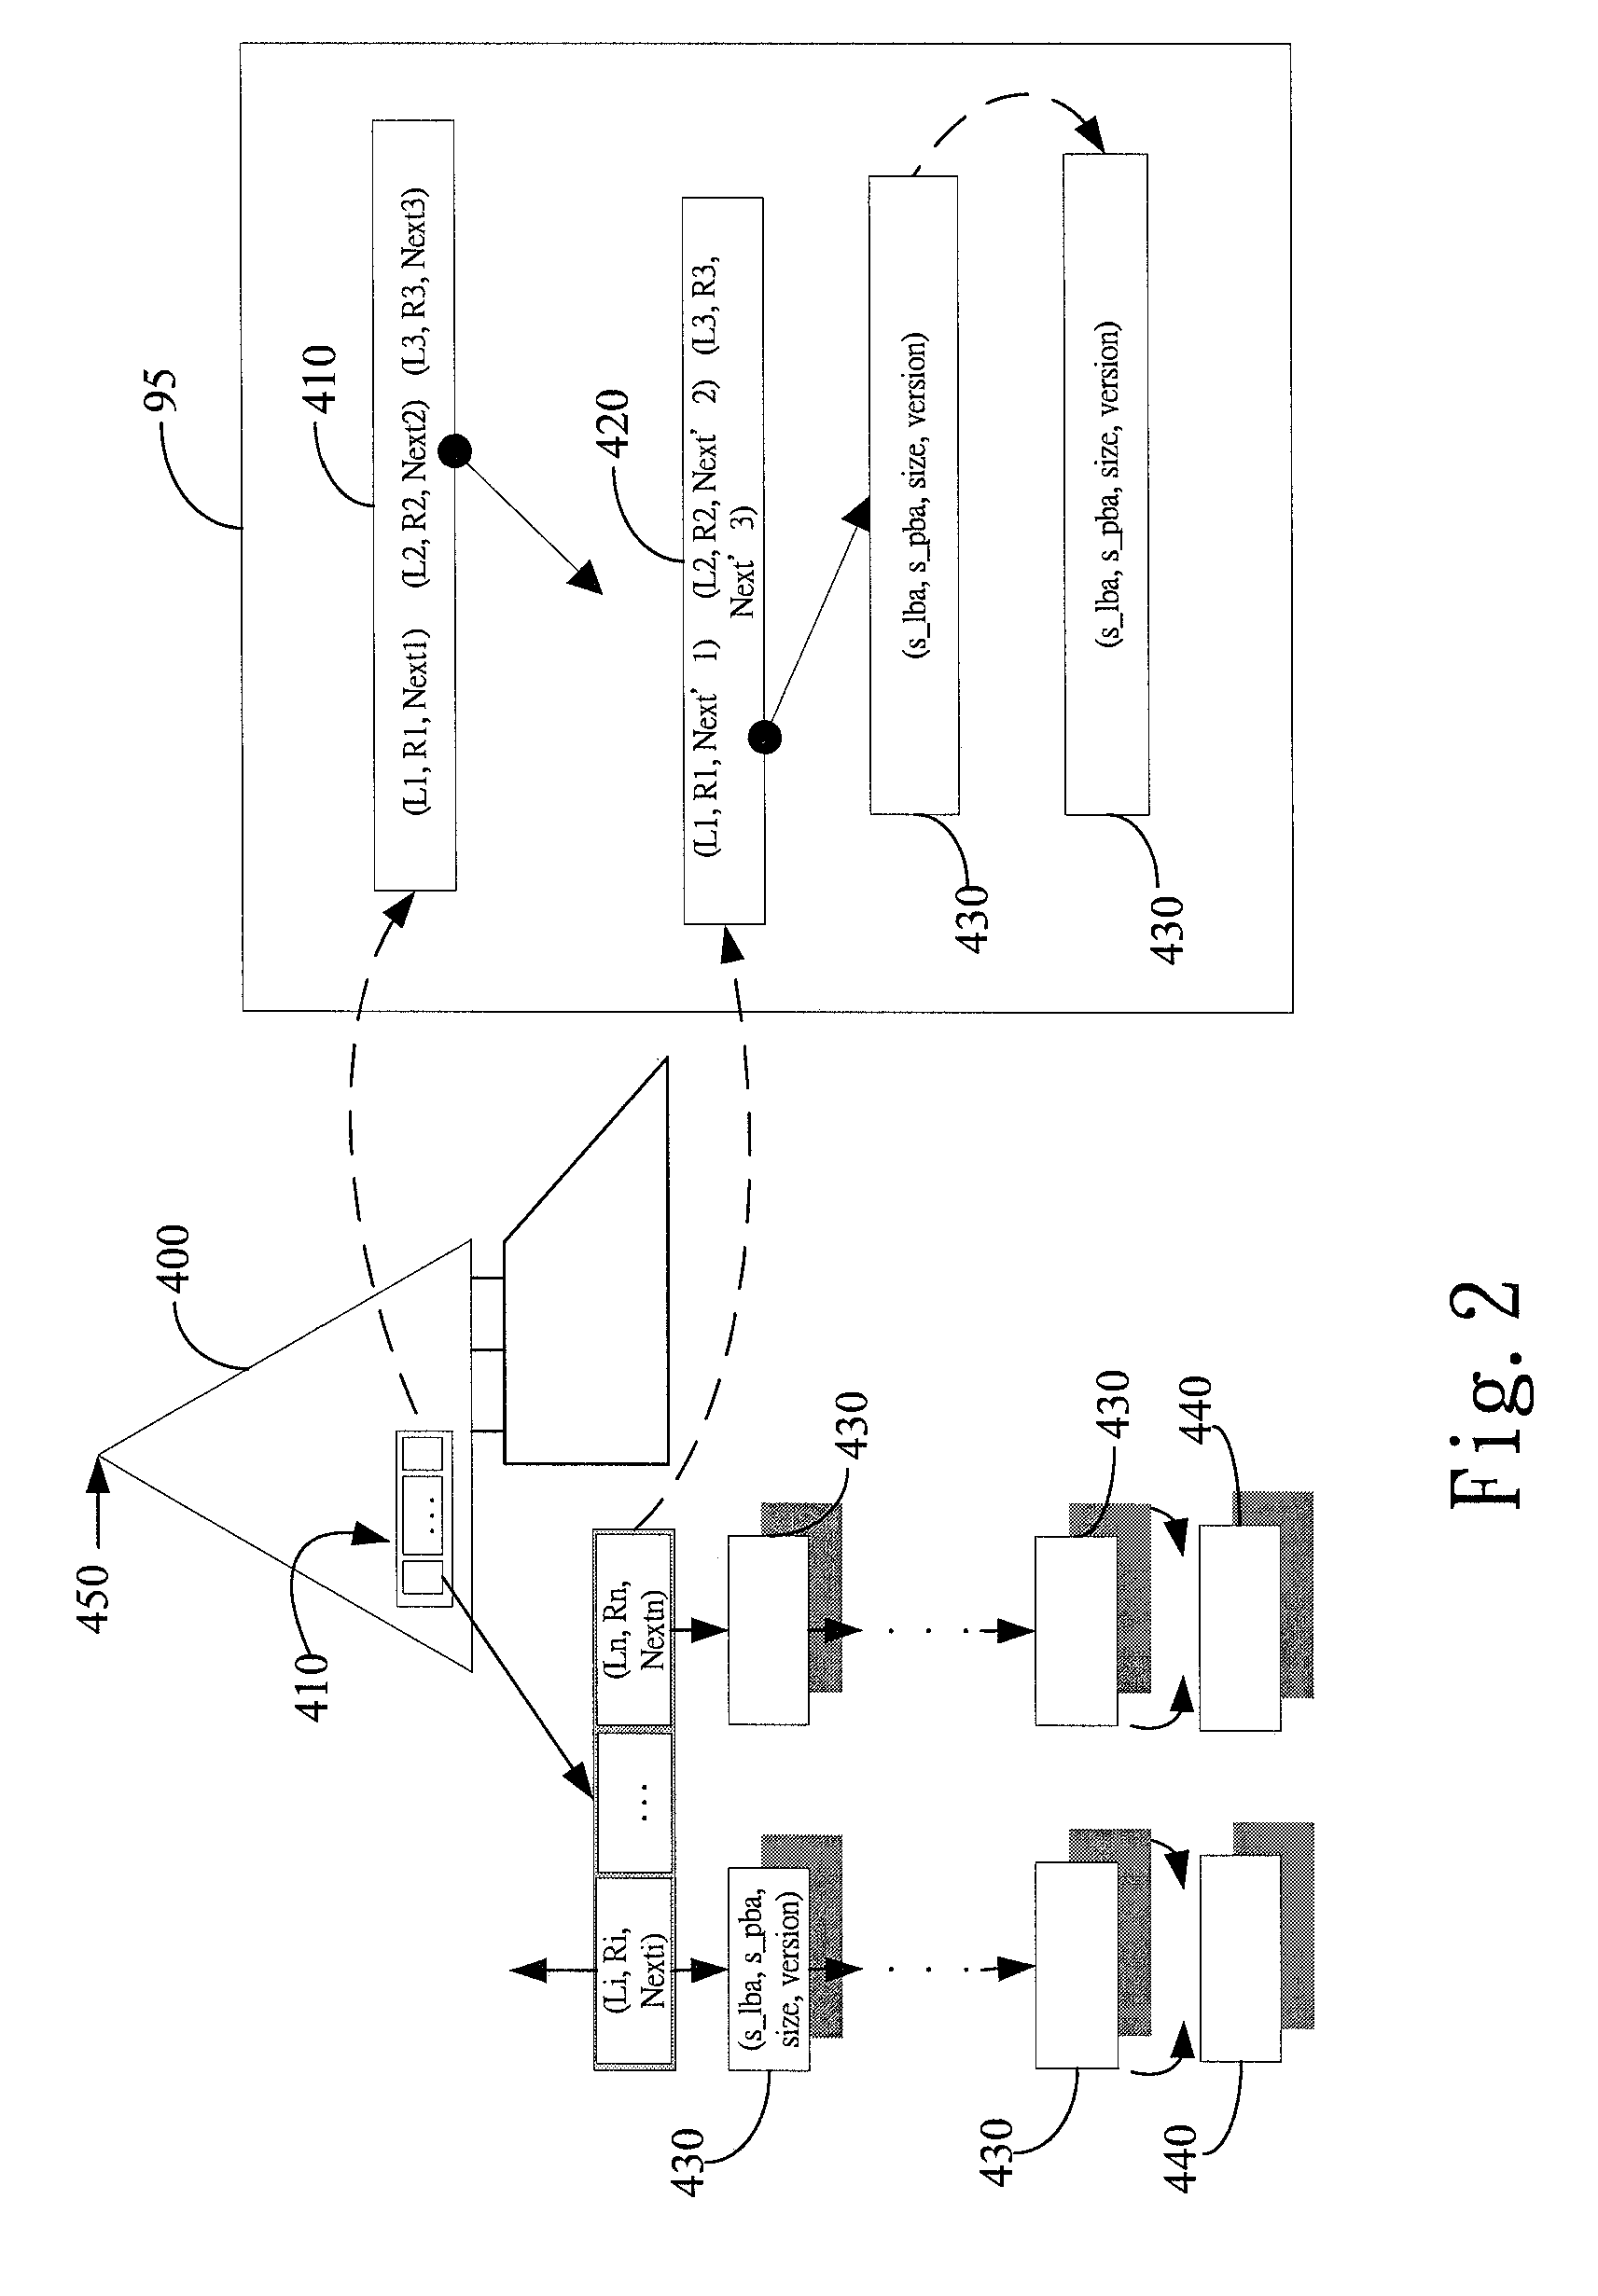 Caching device for NAND flash translation layer